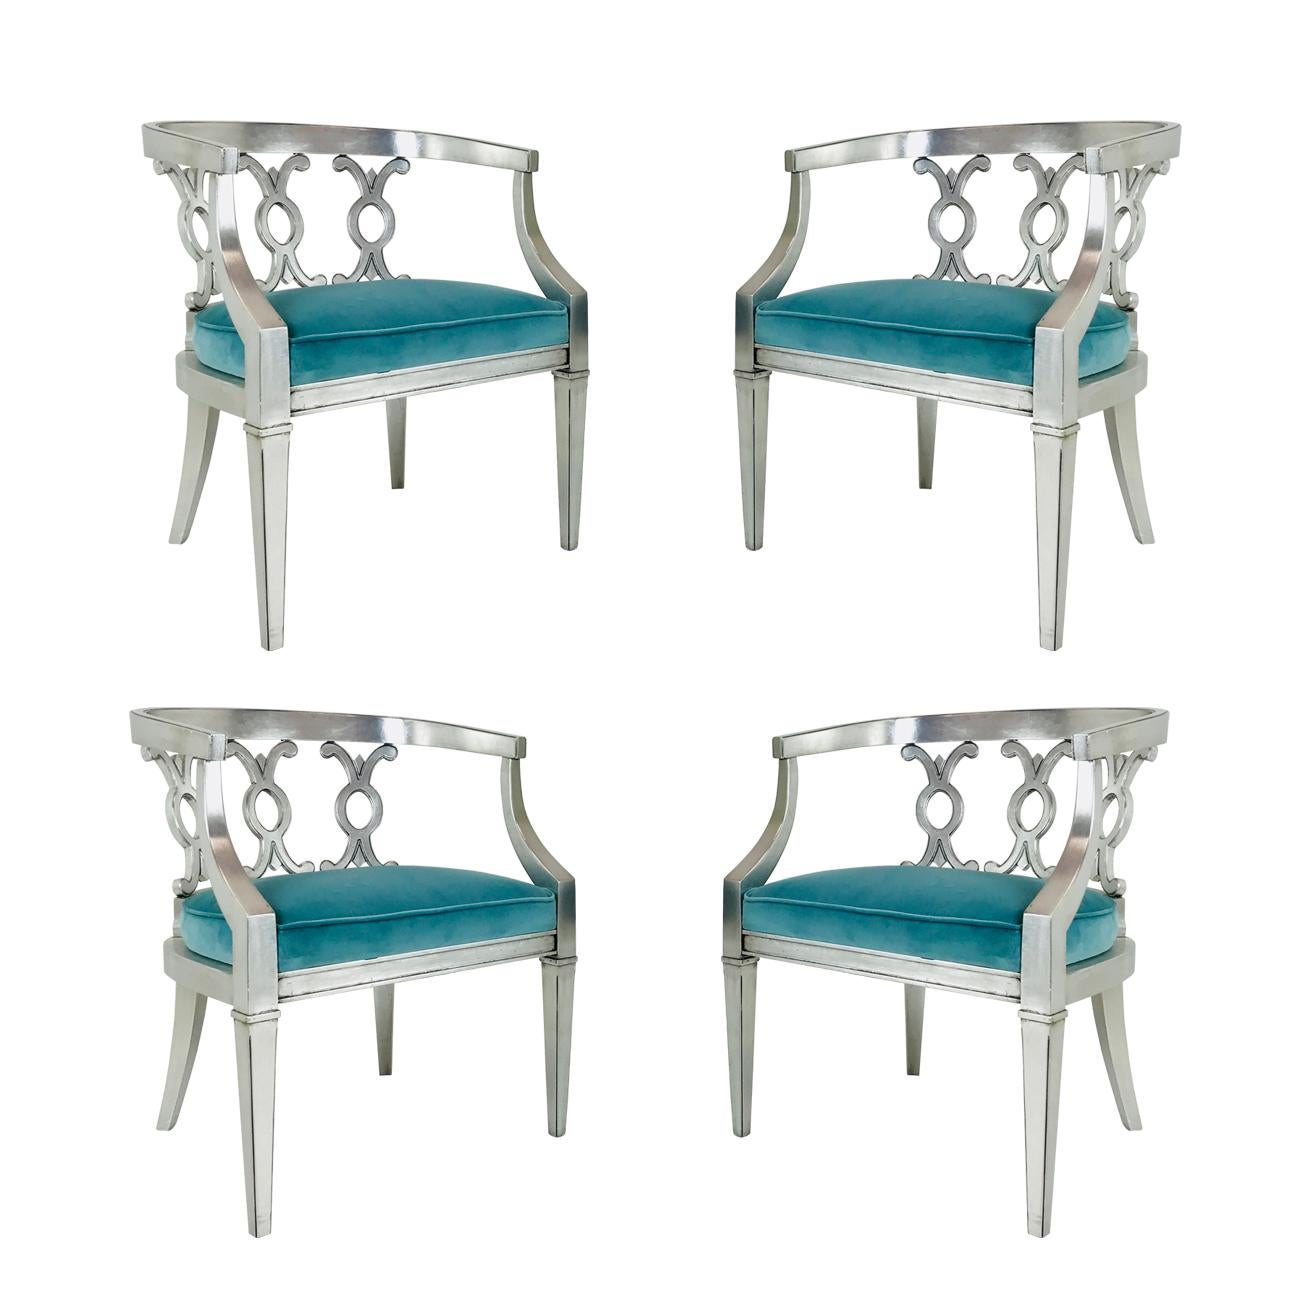 Pair of Hollywood Regency sliver leaf armchairs with turquoise velvet. Newly refinished and upholstered.
There are two sets of pairs available.

Dimensions:
23.5